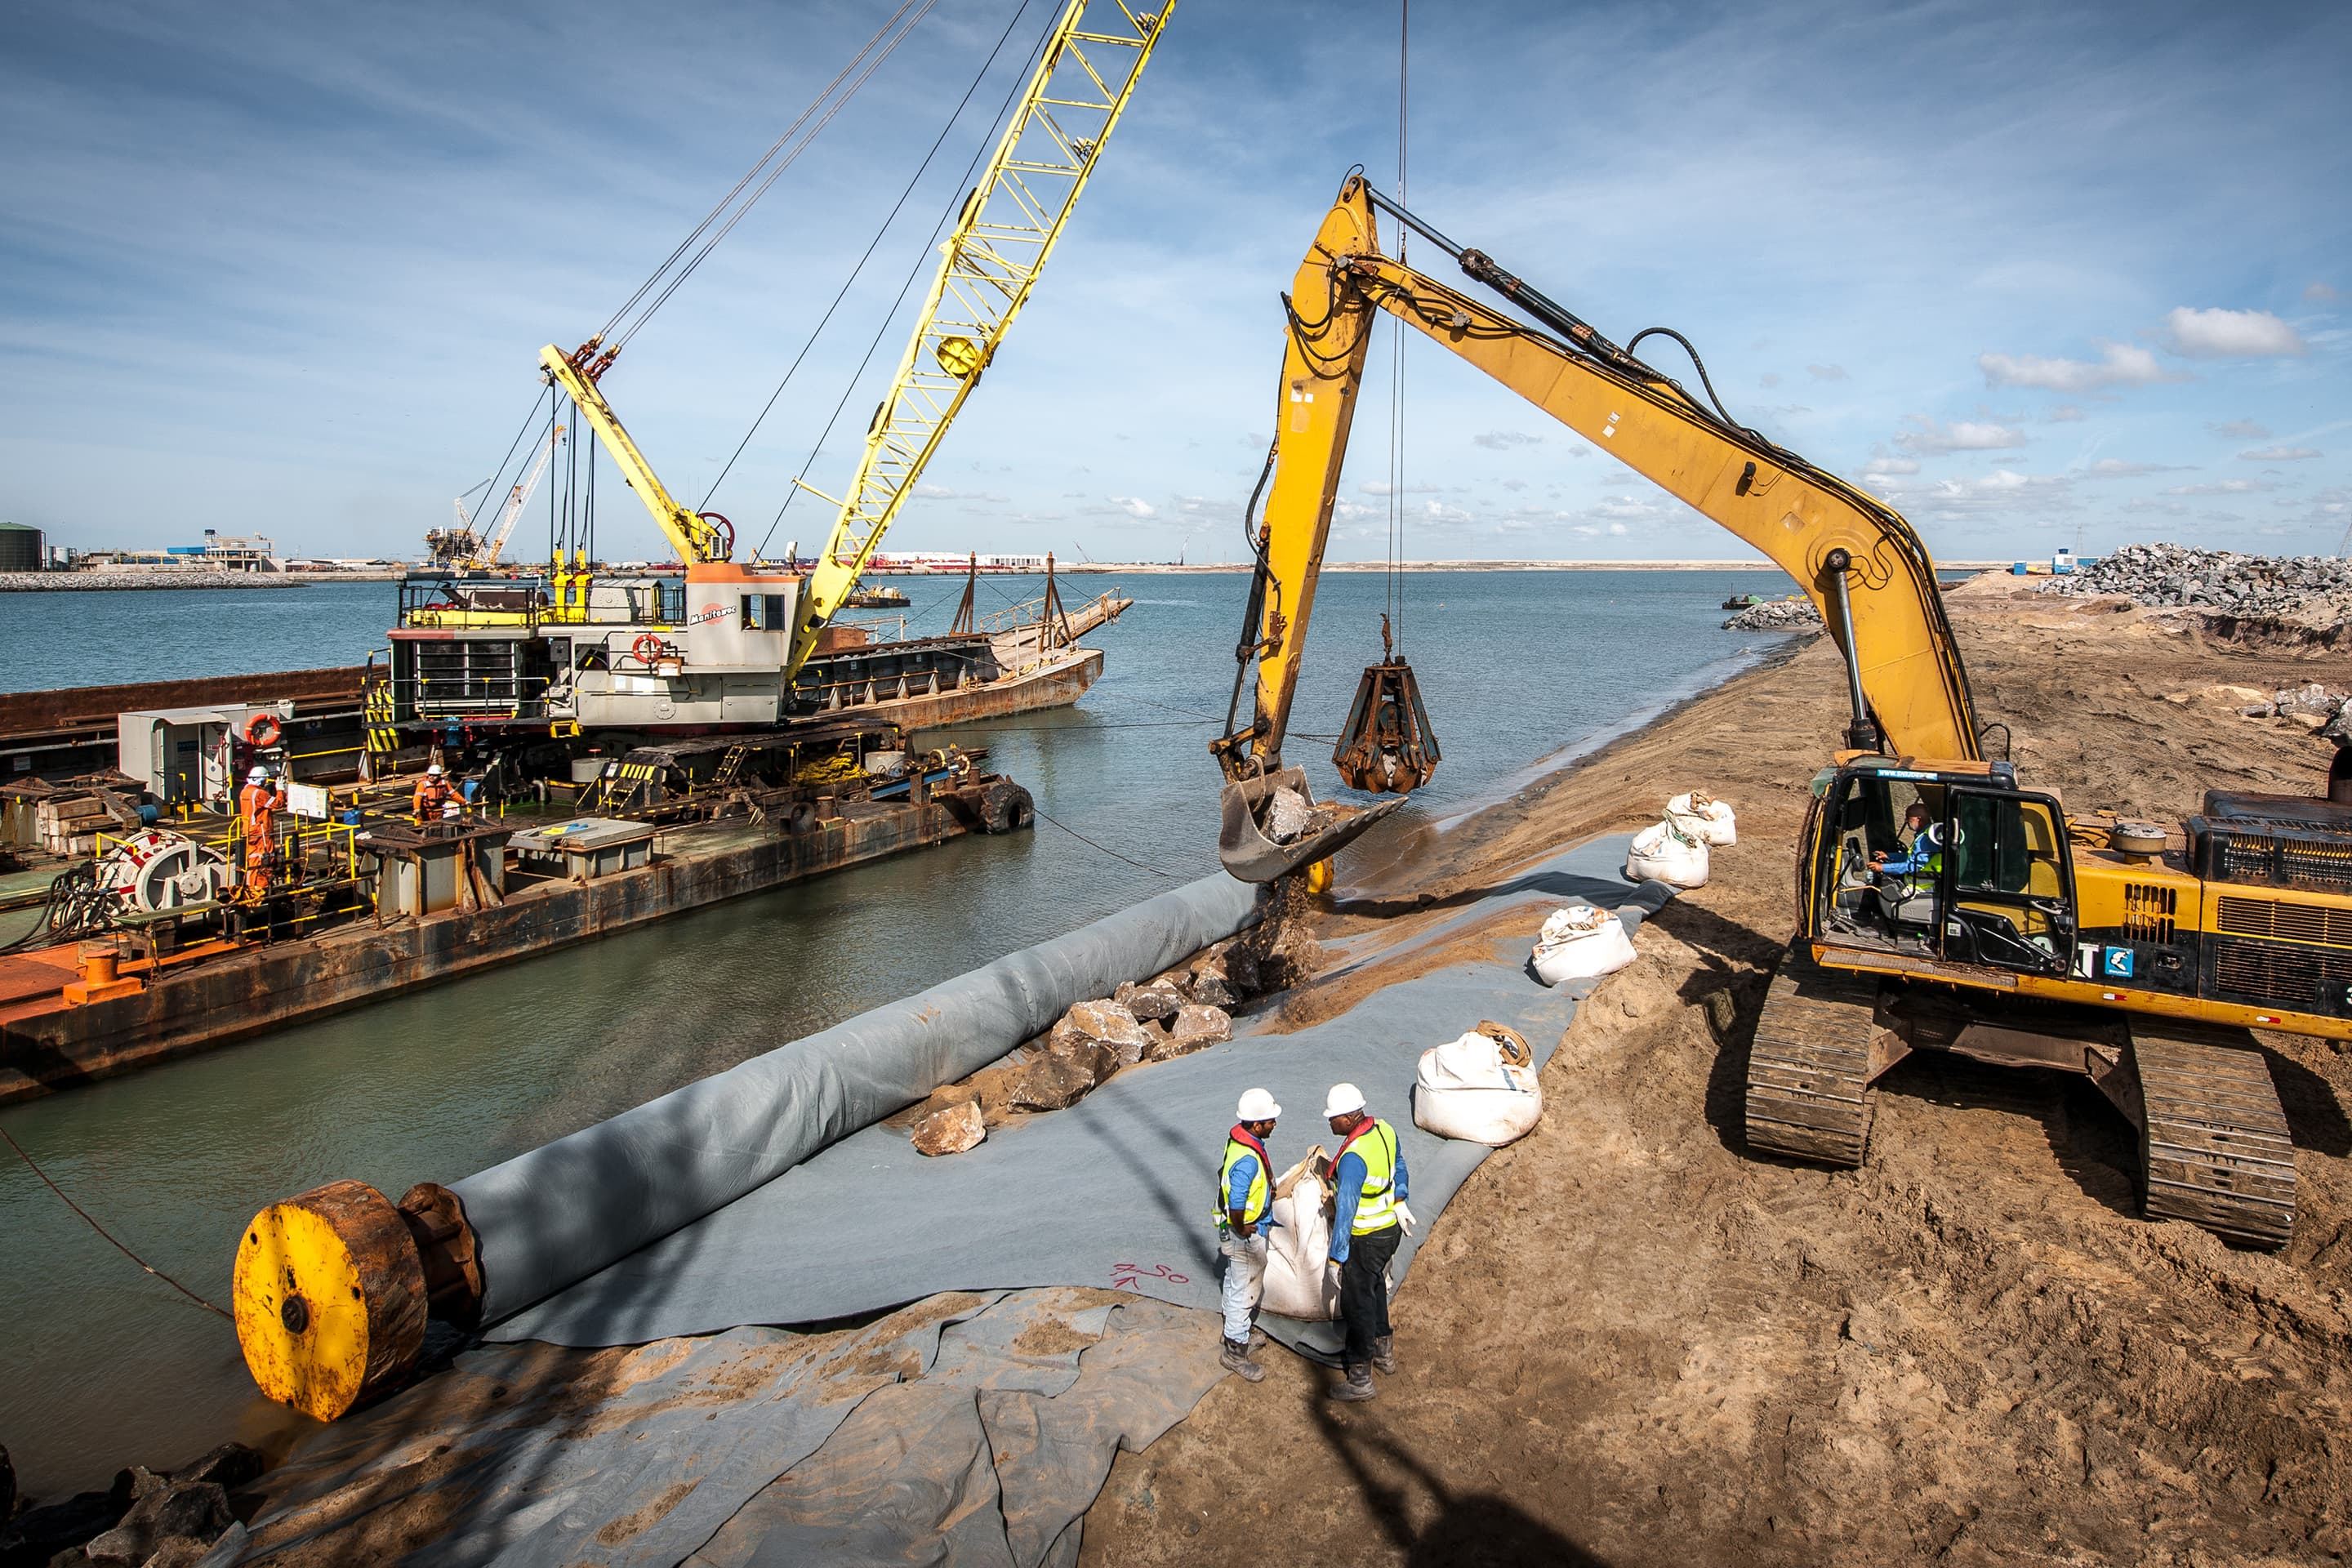 Installation of geotextile to protect a breakwater against erosion